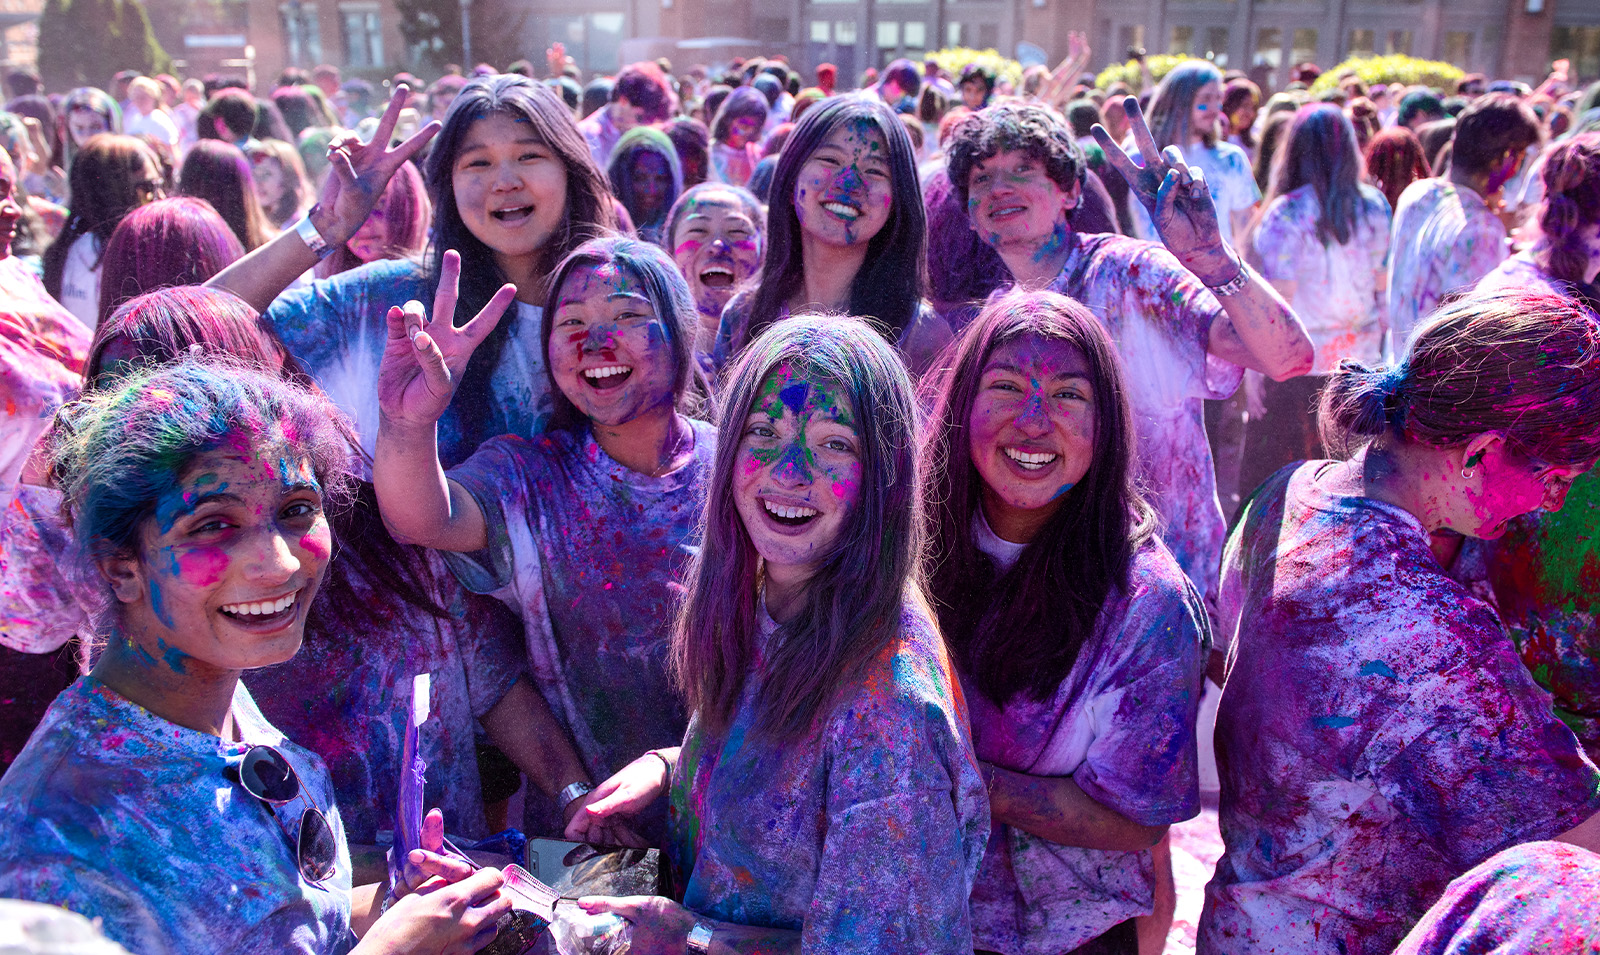 Group of students on a field celebrating Holi and covered in paint